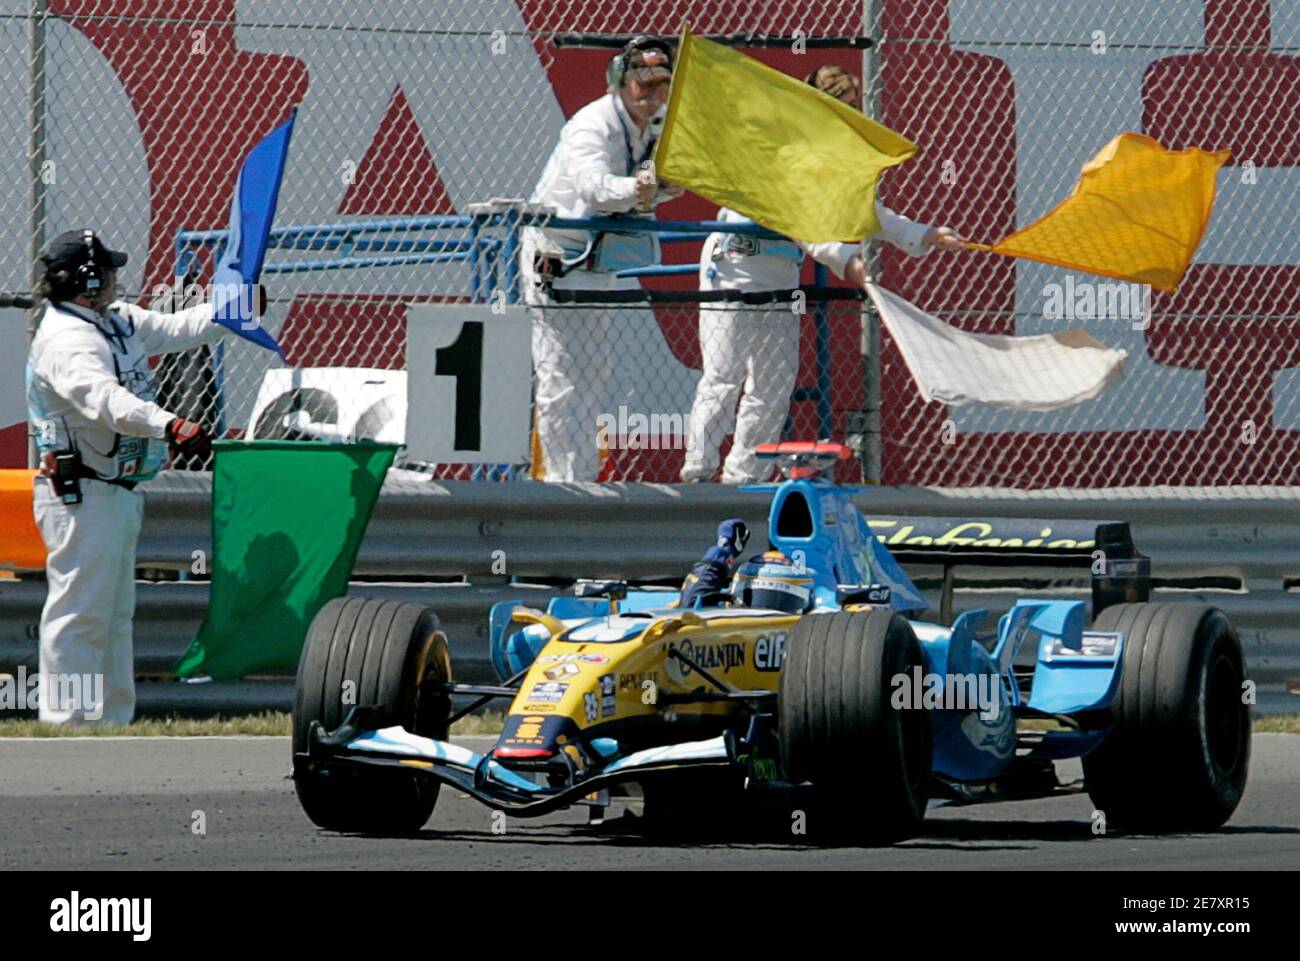 Race marshals wave their colored flags as Renault Formula One Driver Fernando Alonso of Spain drives past after crossing the finish line to win the Canadian Formula One Grand Prix in Montreal June 25, 2006.  REUTERS/J.P. Moczulski (CANADA) Stock Photo